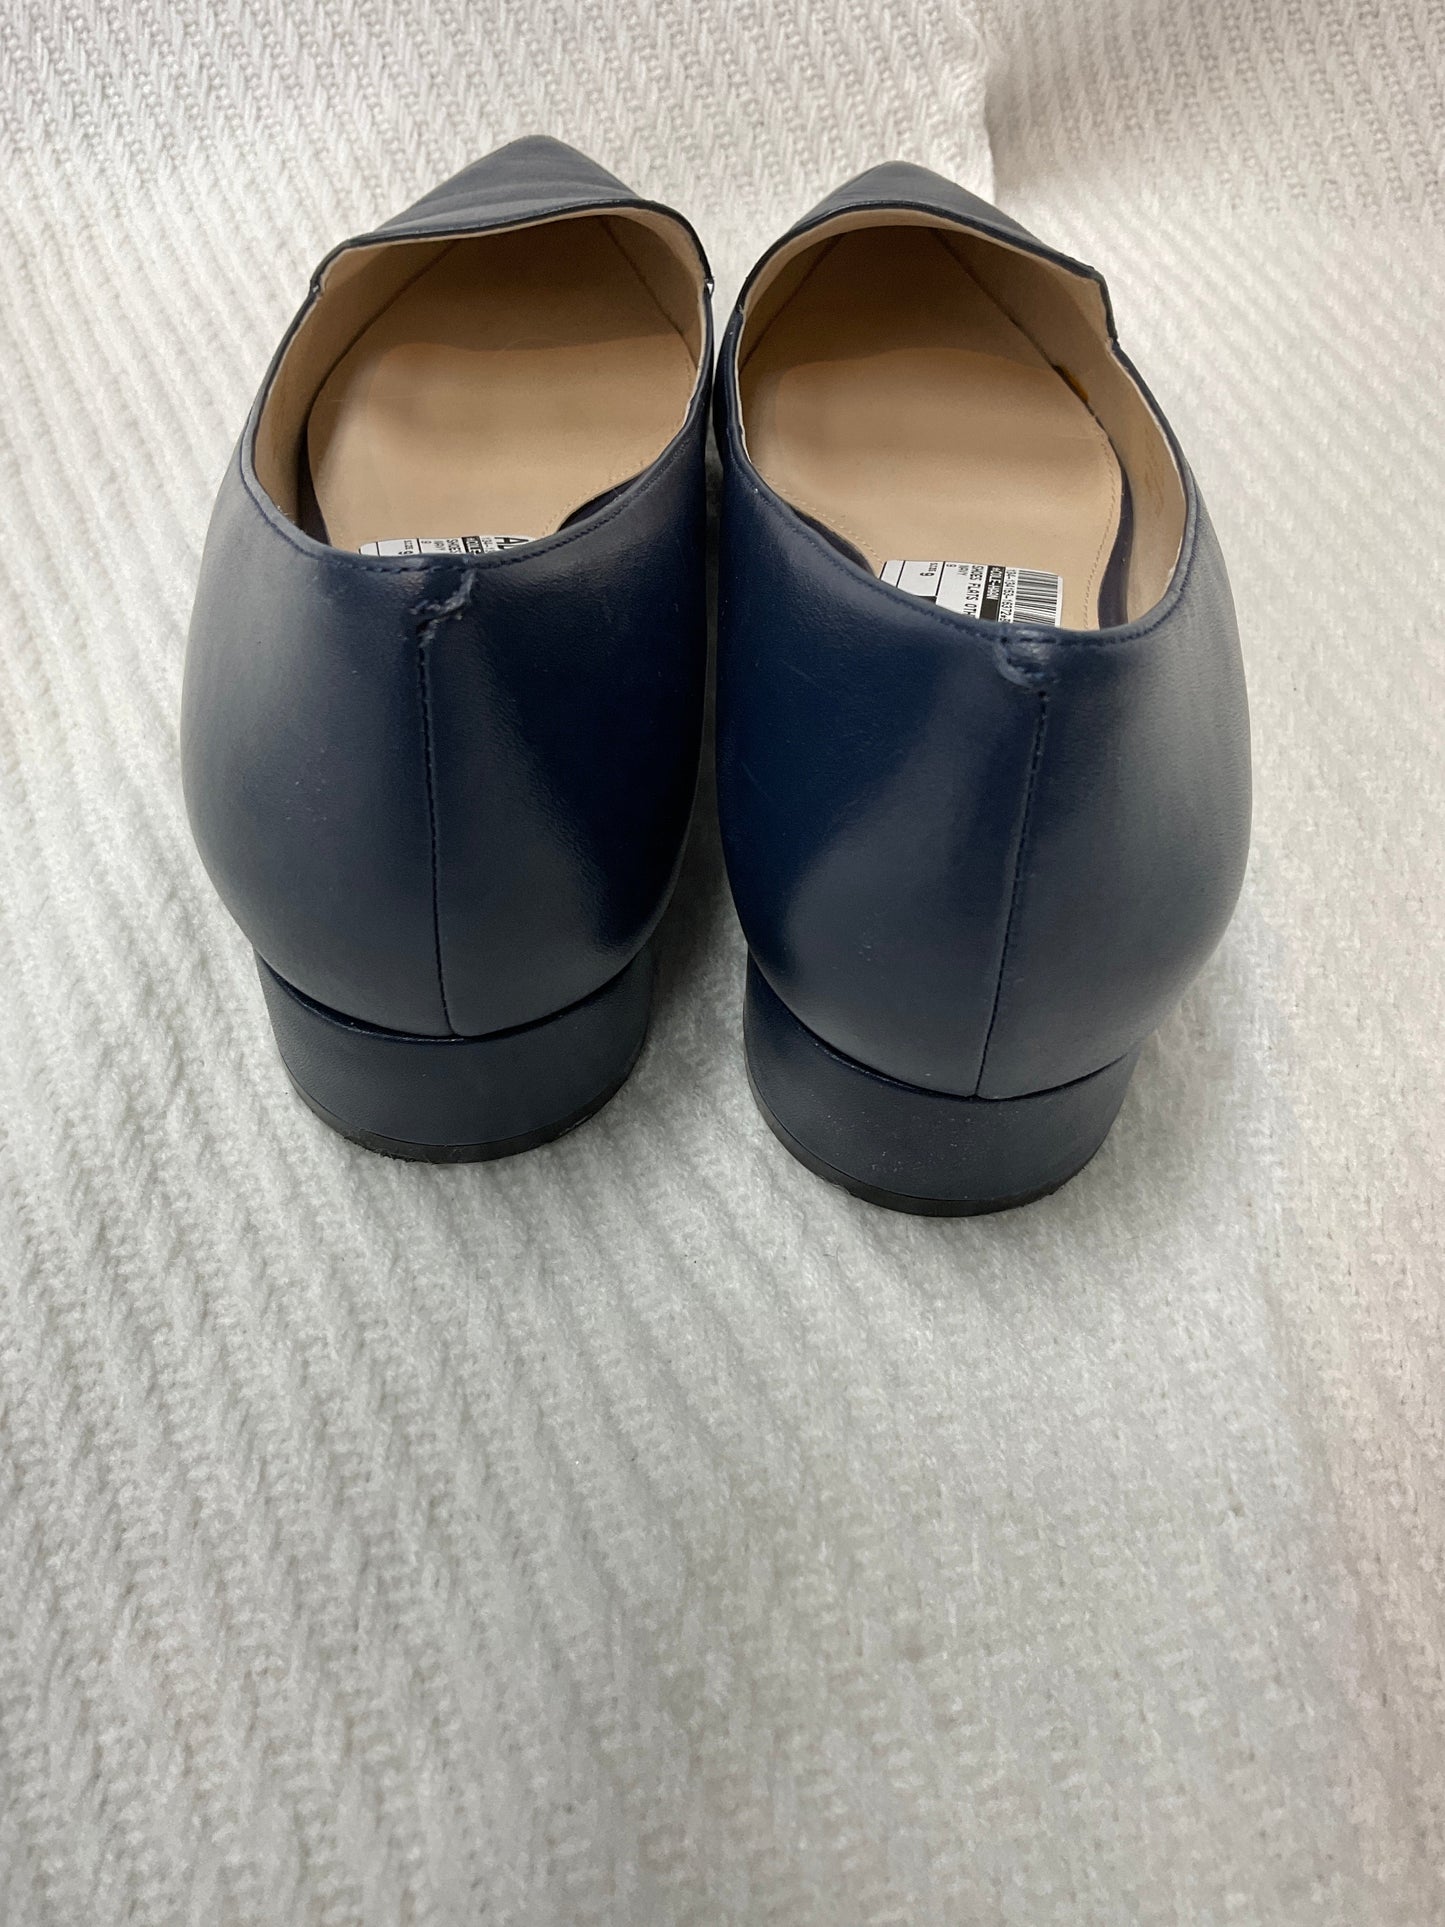 Shoes Flats Other By Cole-haan  Size: 9